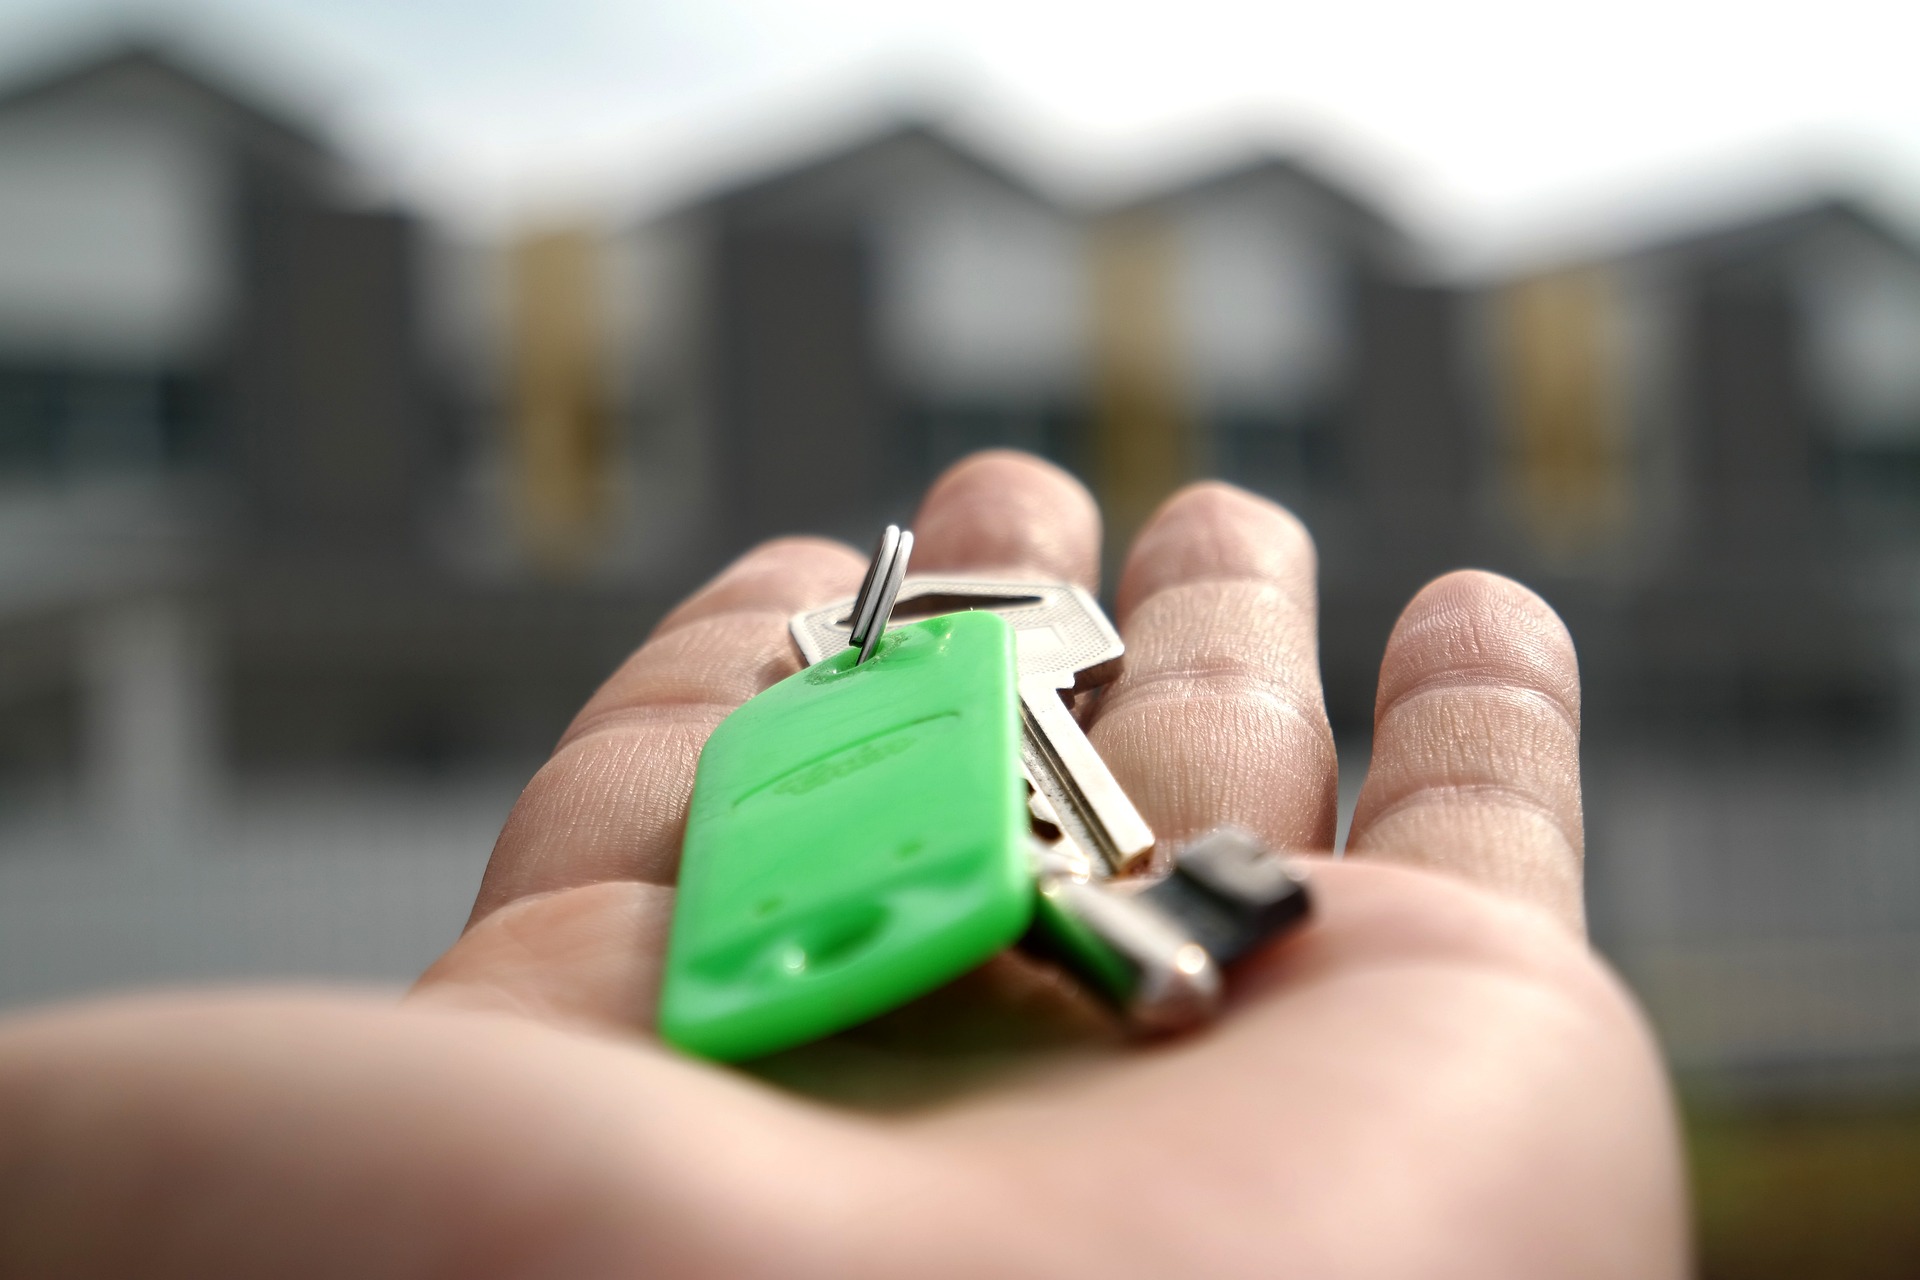 An image showing a hand outstretched with keys and a green keyring attached to it.